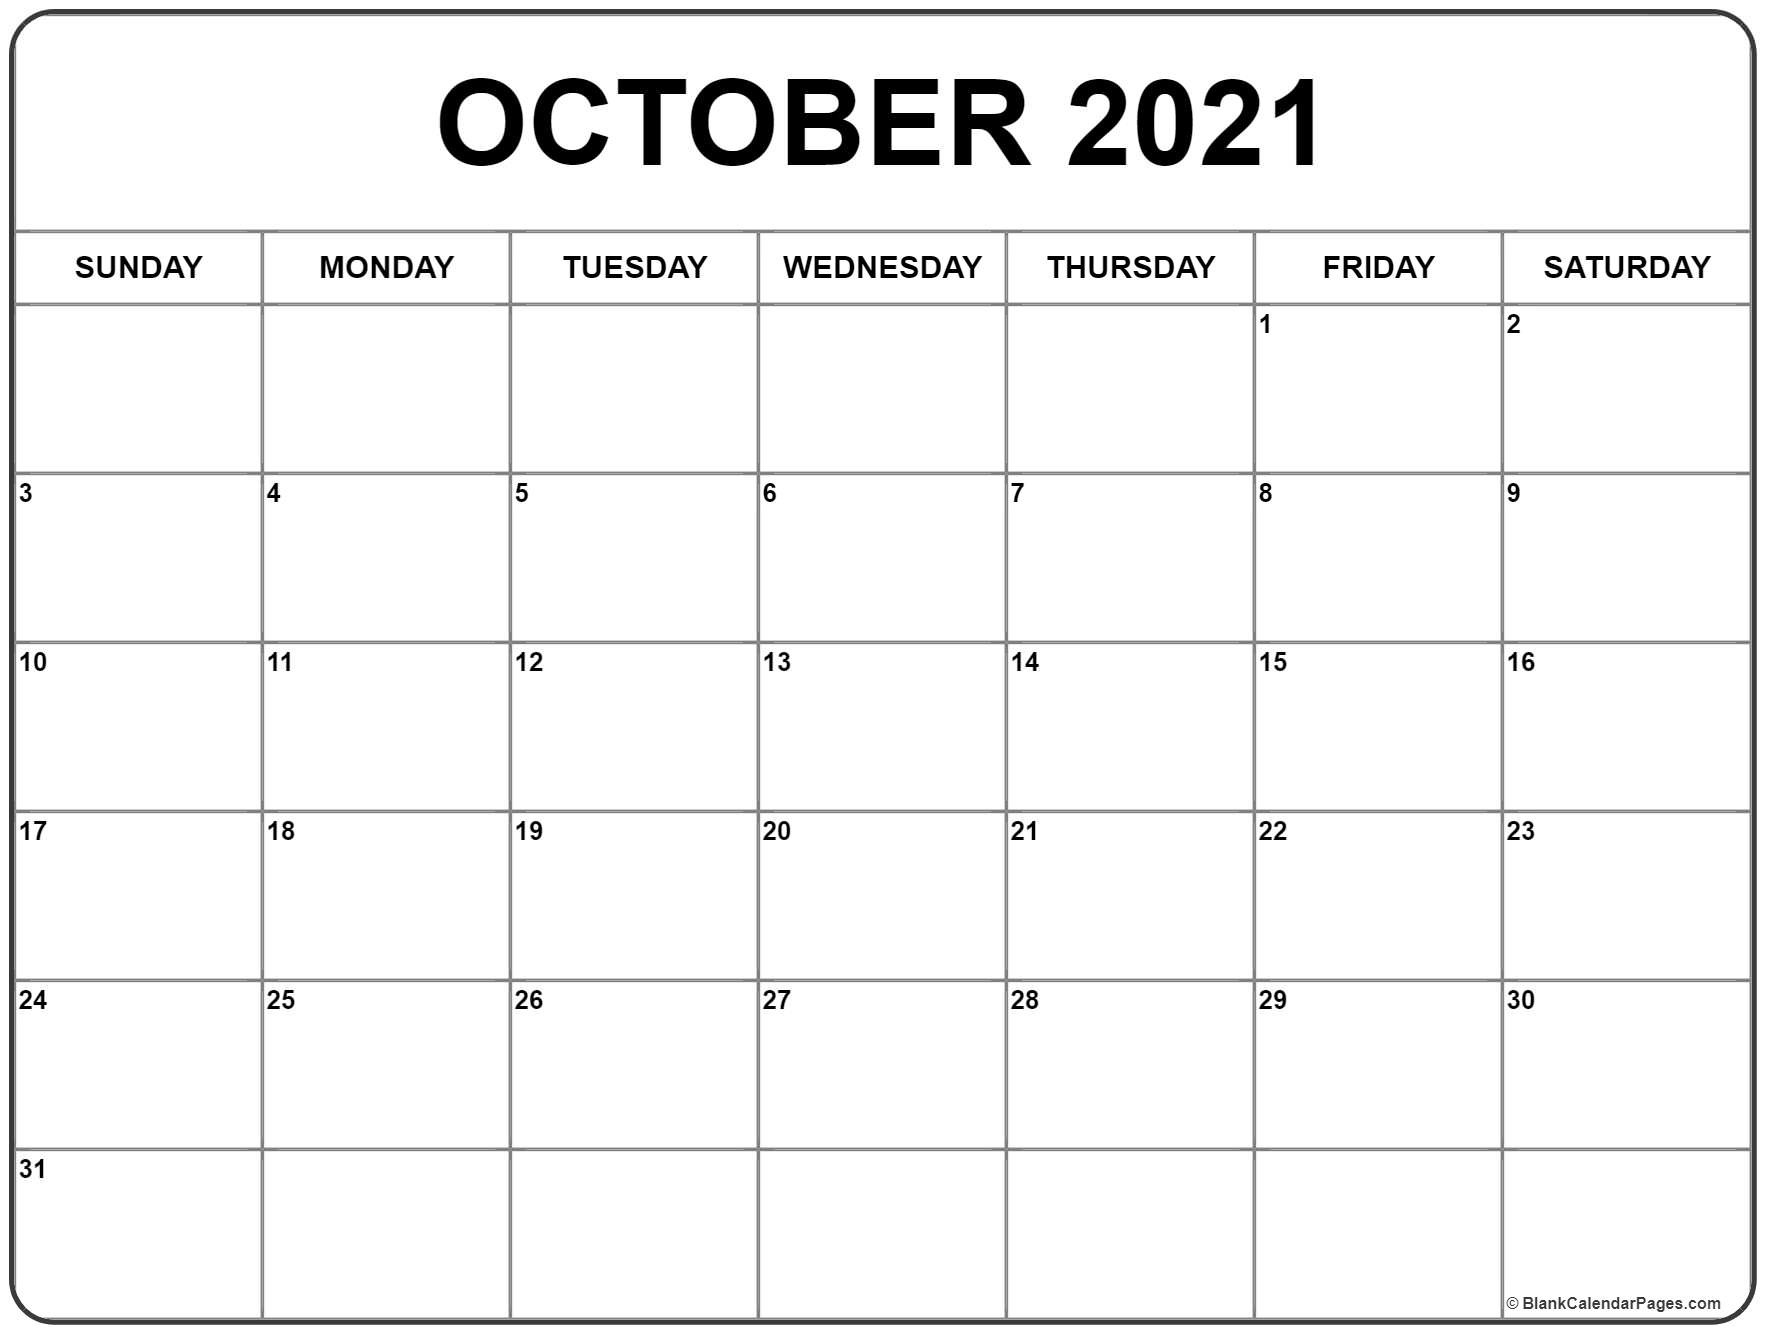 October 2021 Calendar | Free Printable Monthly Calendars-Monthly Bill Calendar 2021 Printable